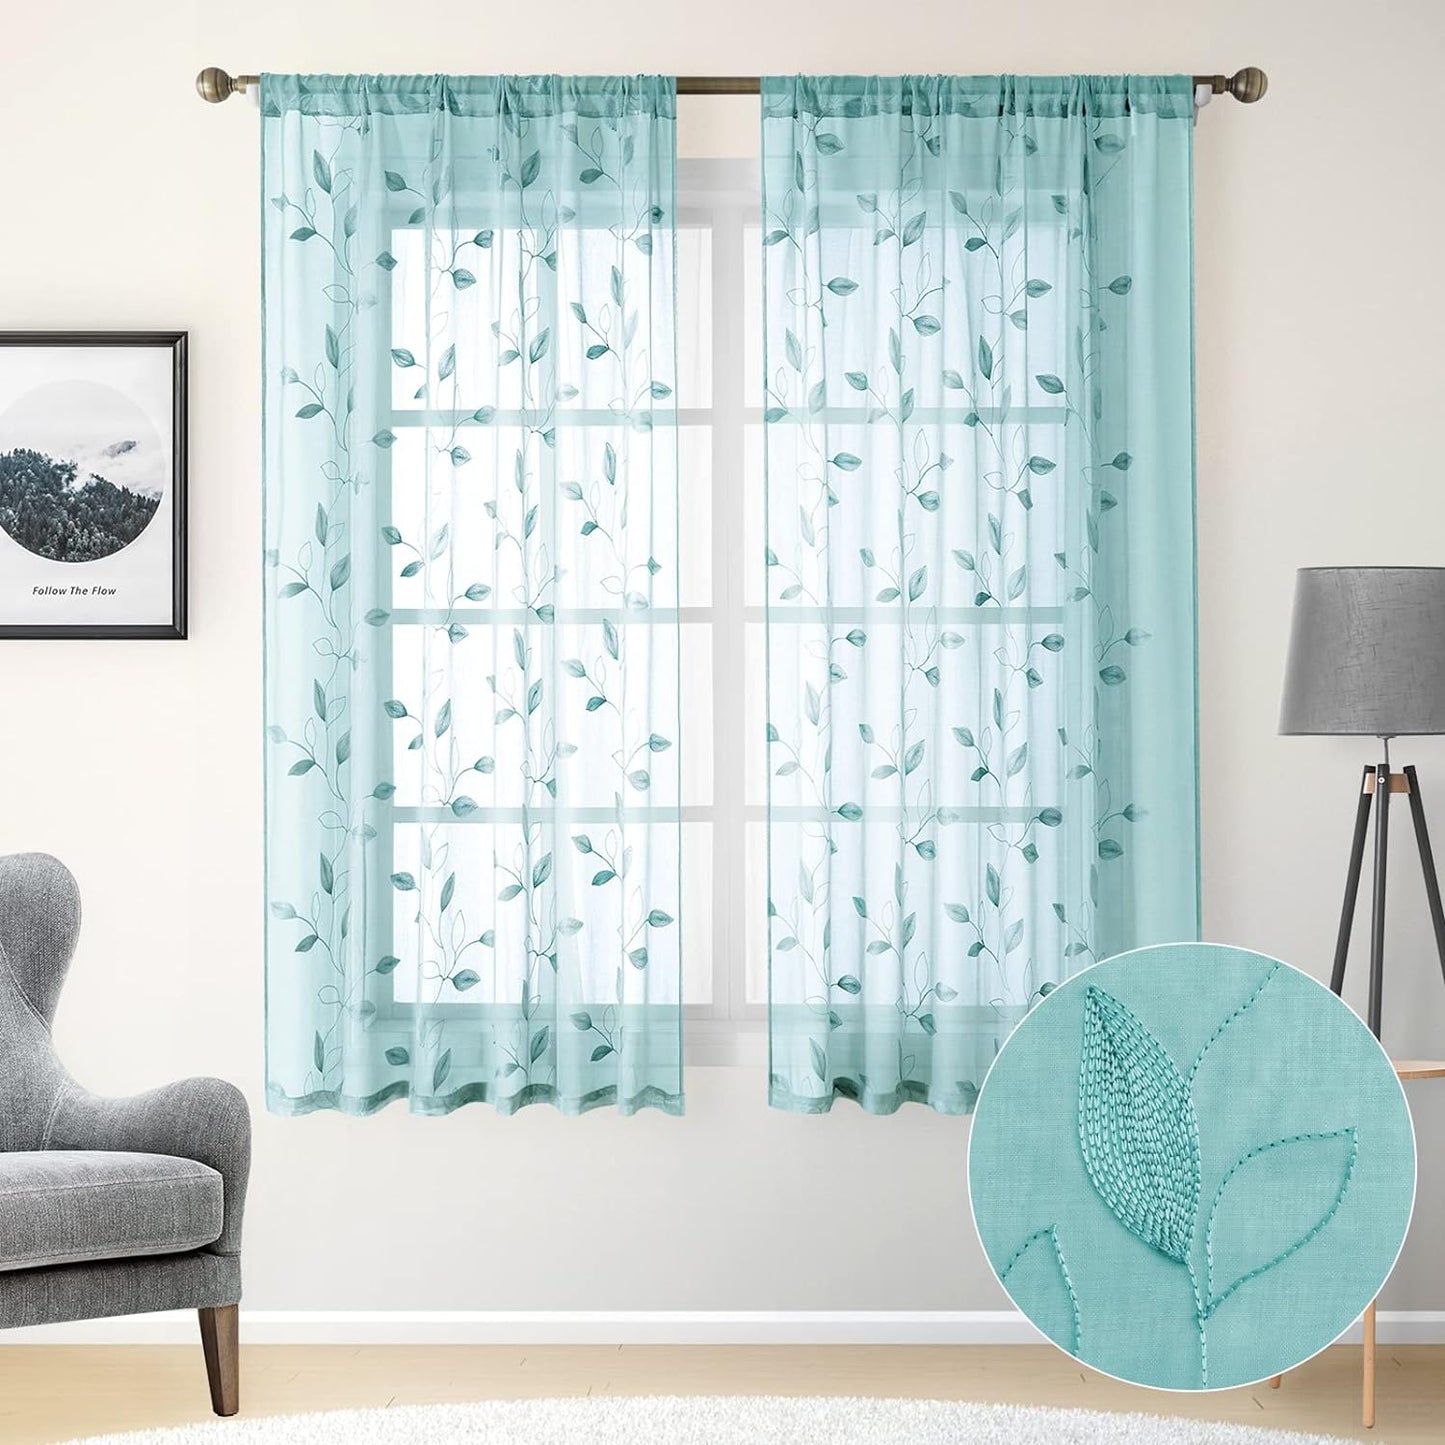 HOMEIDEAS Sage Green Sheer Curtains 52 X 63 Inches Length 2 Panels Embroidered Leaf Pattern Pocket Faux Linen Floral Semi Sheer Voile Window Curtains/Drapes for Bedroom Living Room  HOMEIDEAS 5-Turquoise W52" X L63" 